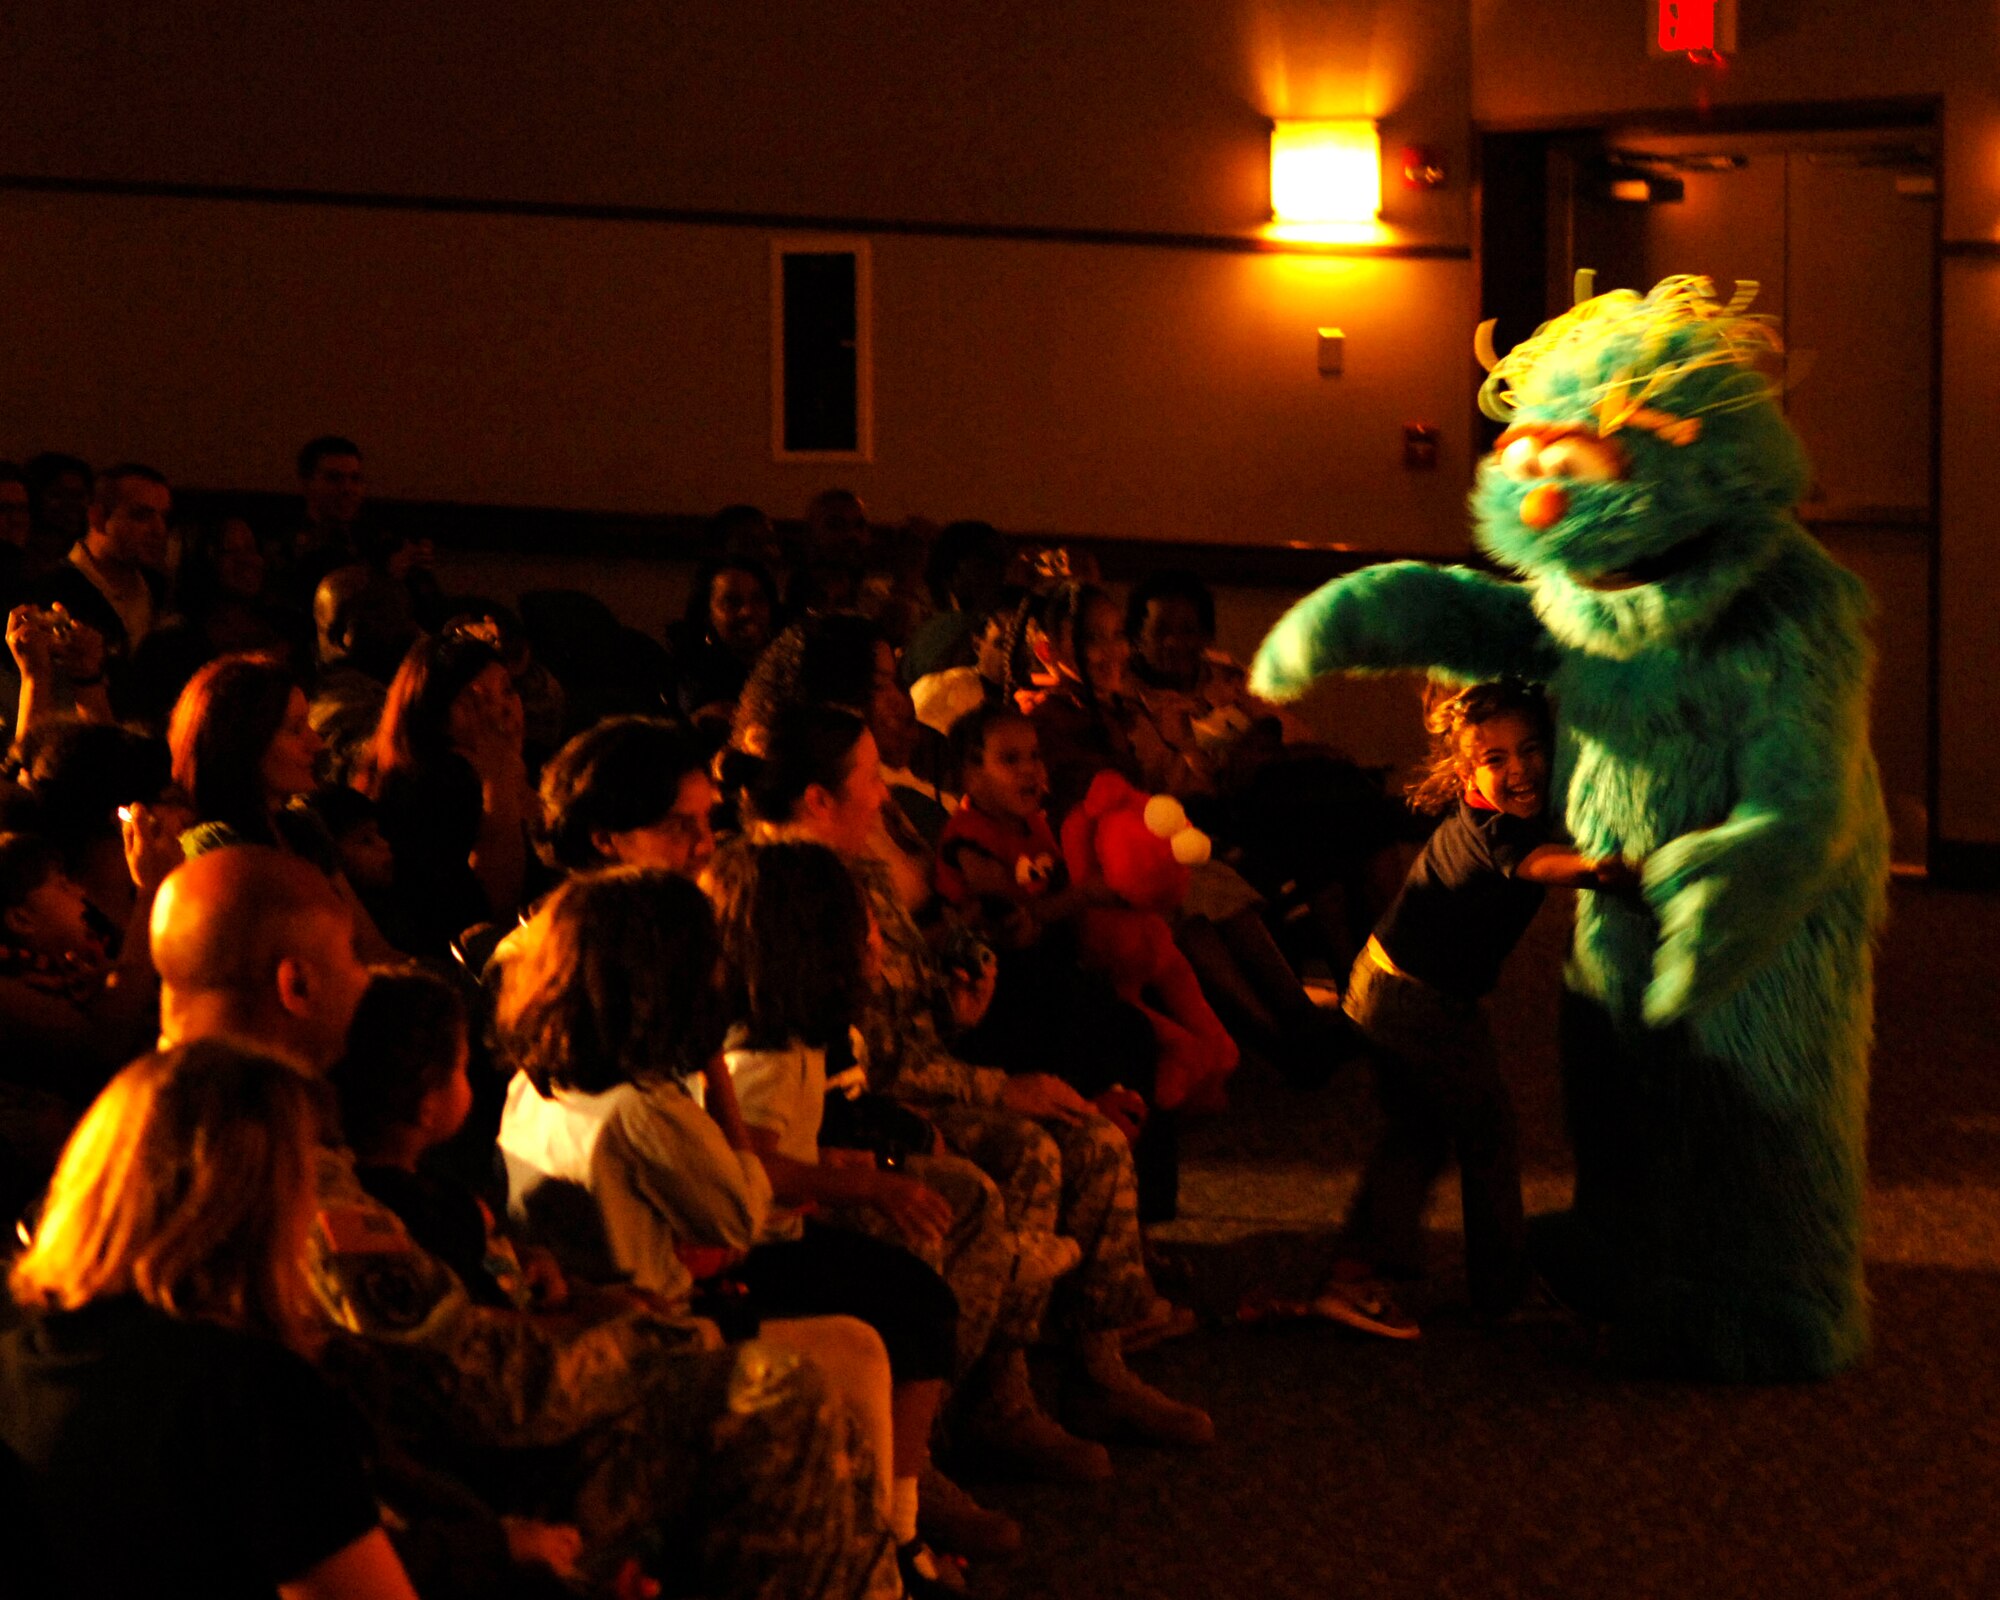 Rosita hugs one of her fans during “The Sesame Street Experience for Military Families” USO Tour Oct. 16 and 17 at the base theater.  Over 1,000 tickets were given to military families per show so children could meet some of their favorite muppets and better understand when a parent deploys. (U.S. Air Force photo/Senior Airman Steven R. Doty)